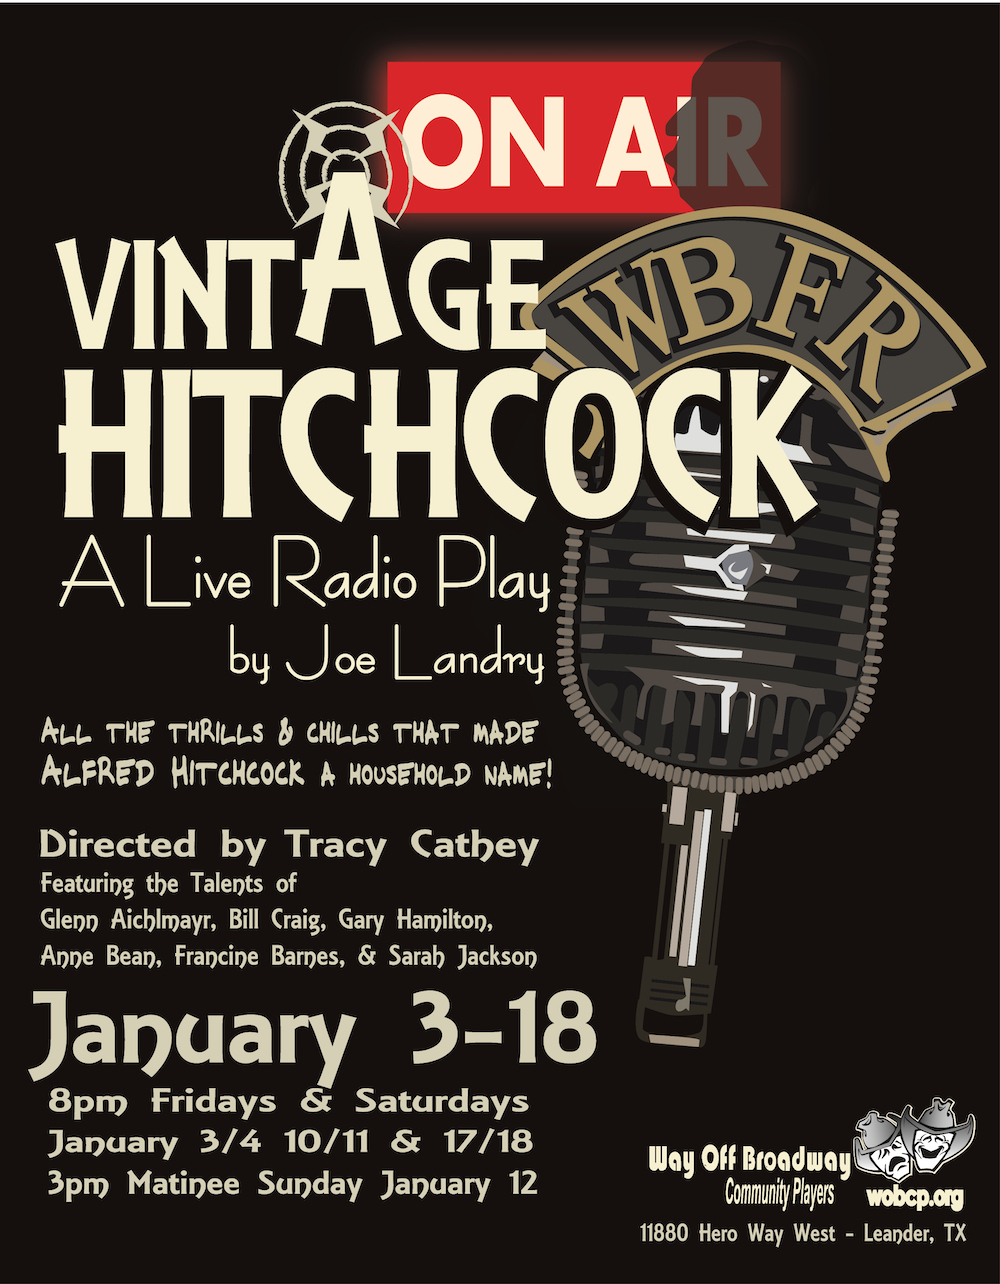 Vintage Hitchcock: A Live Radio Play by Way Off Broadway Community Players